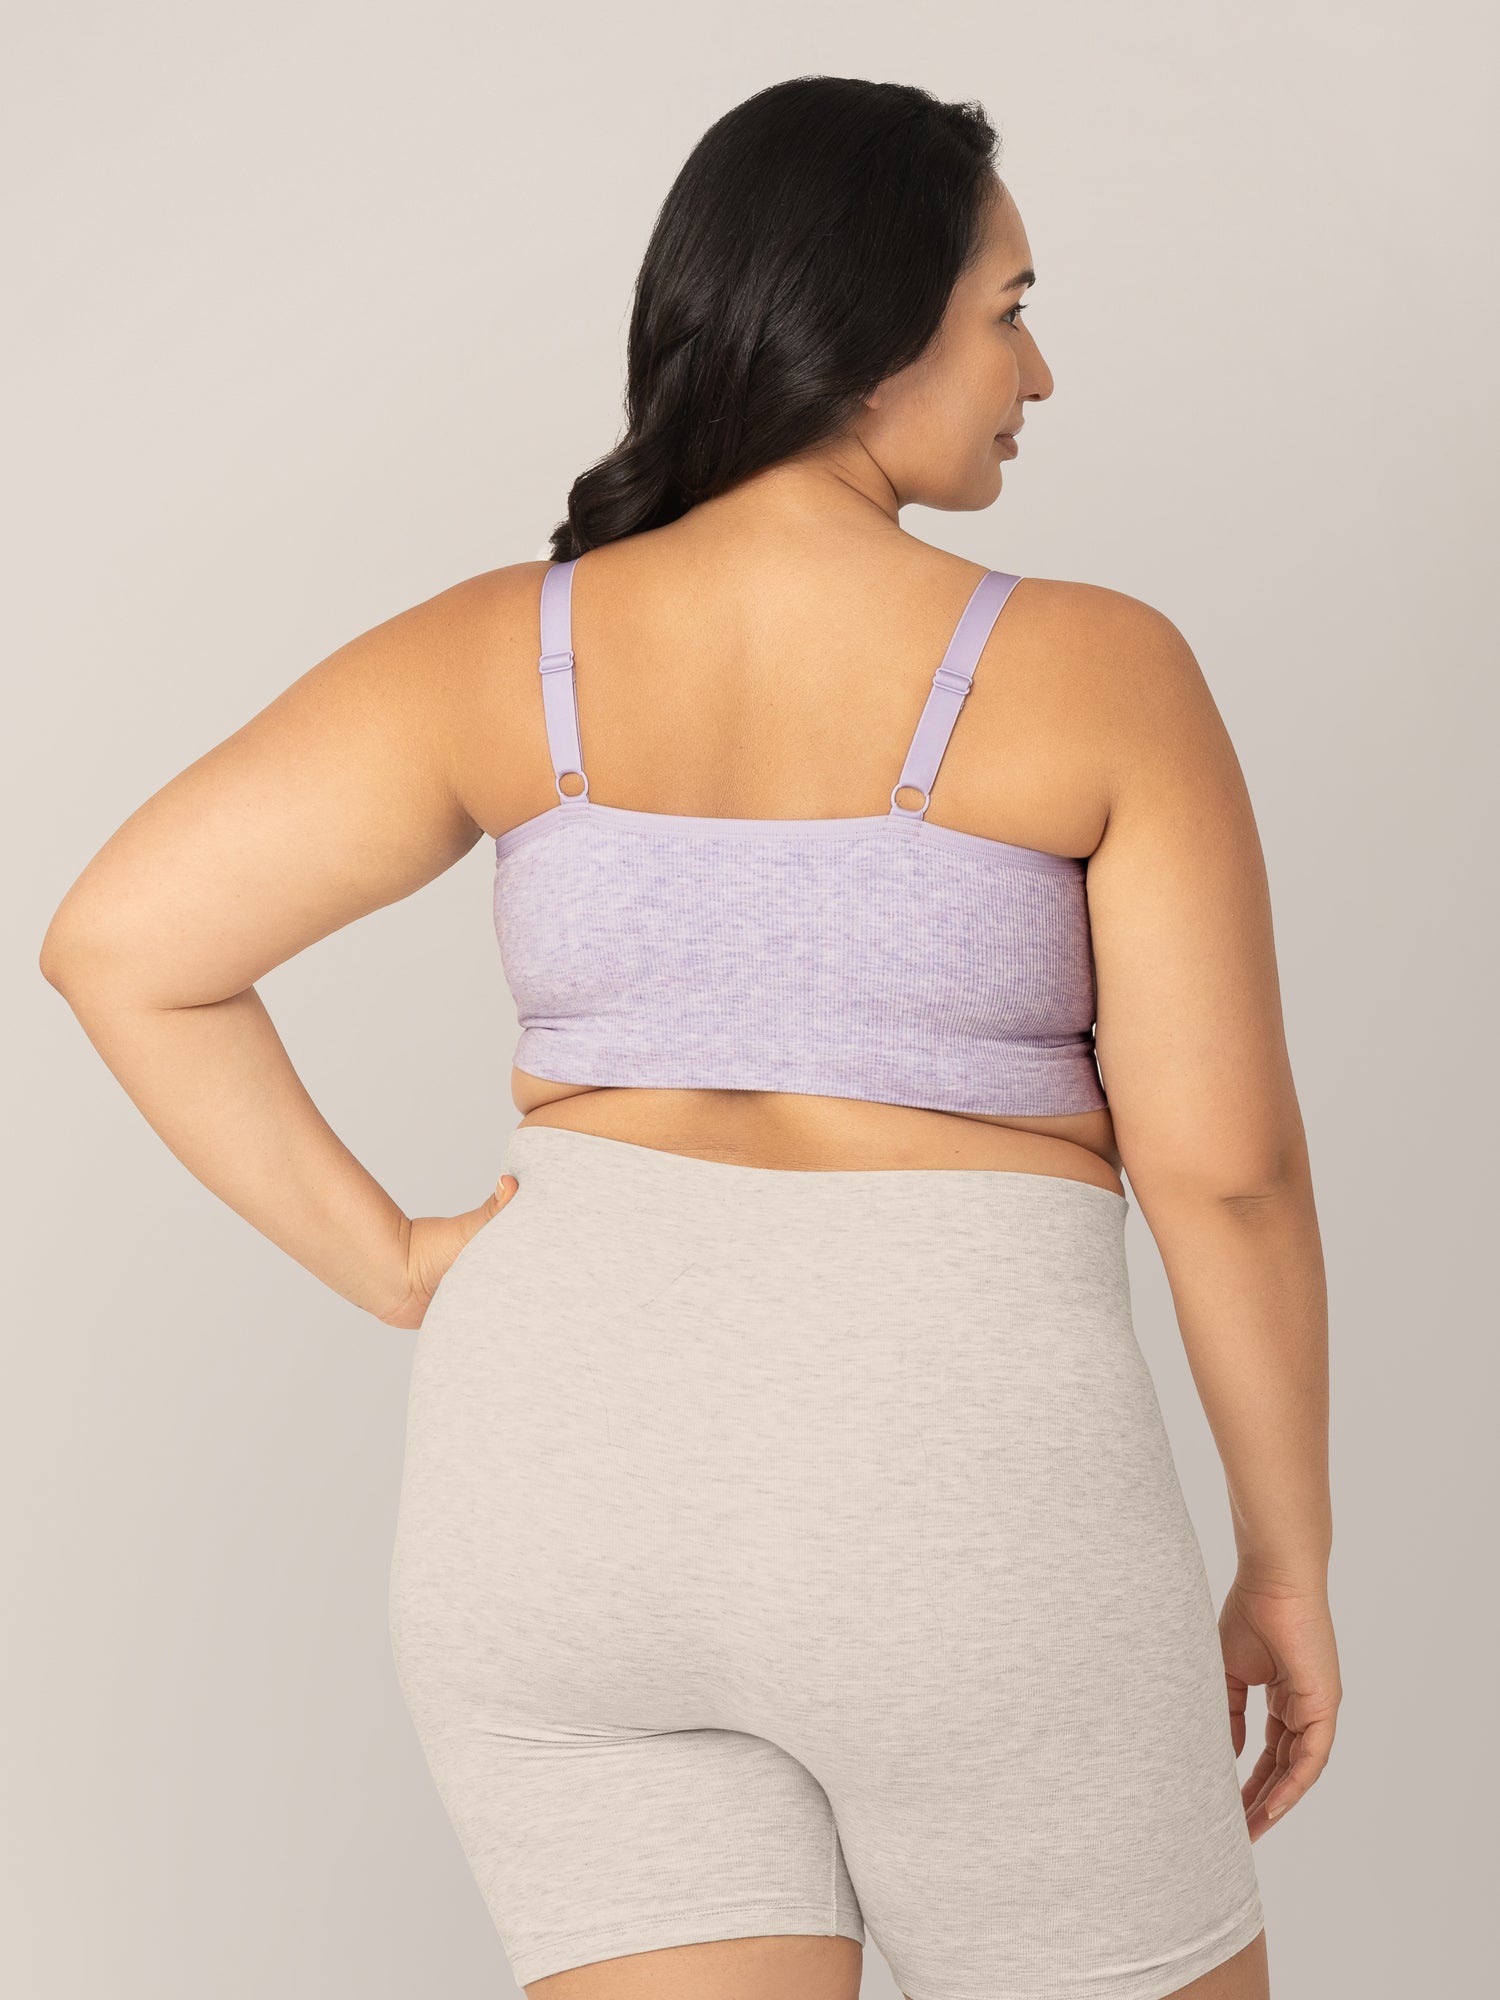 Back view of model wearing the Sublime® Bamboo Hands-Free Pumping Lounge & Sleep Bra in Lavender Heather in a busty fit.